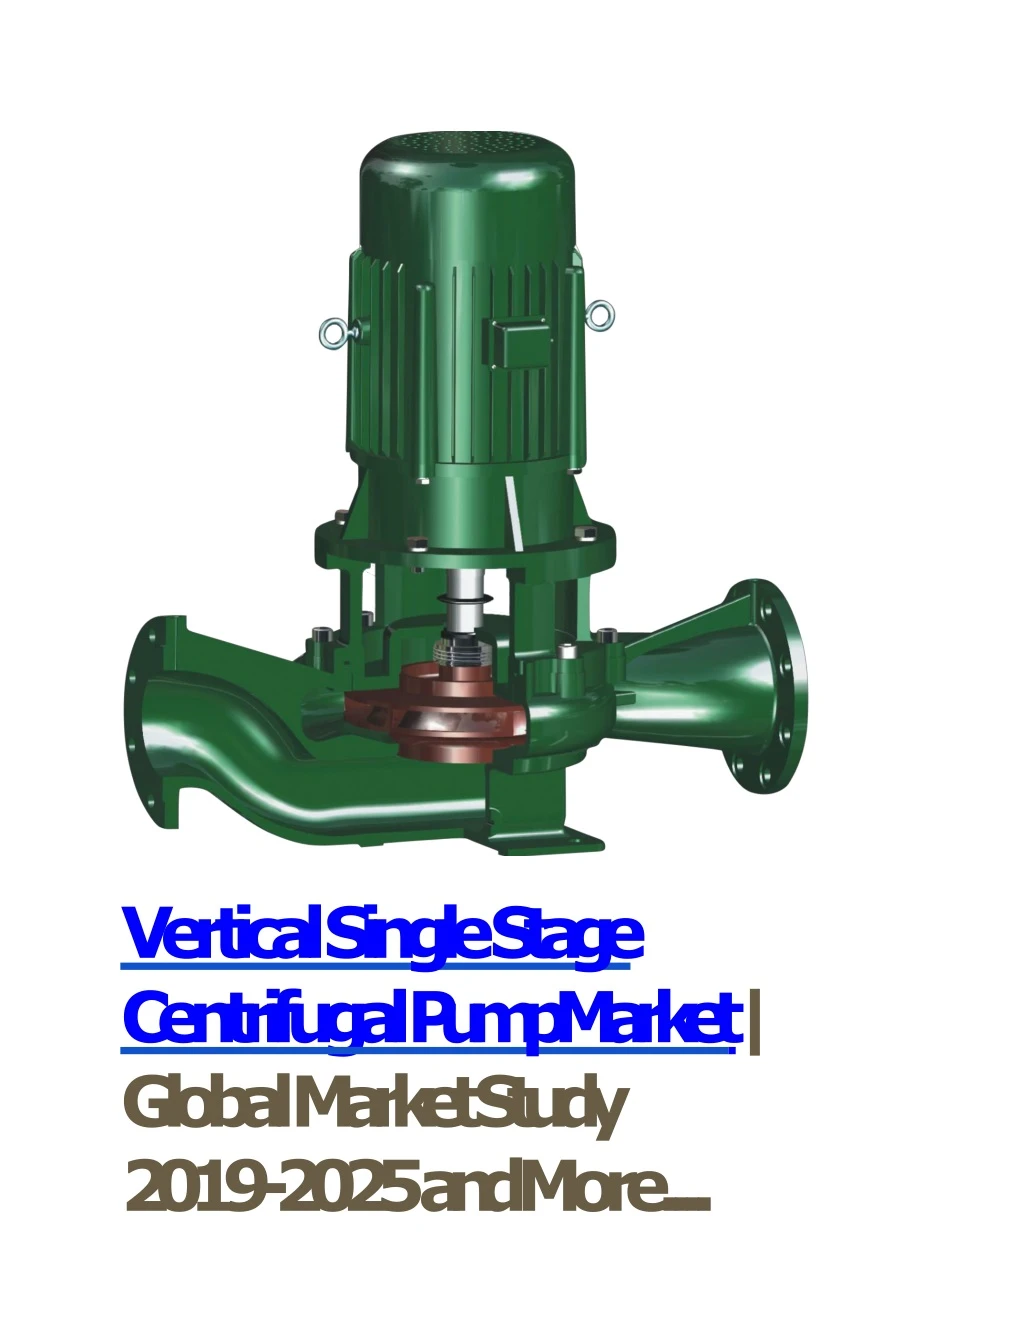 vertical single stage centrifugal pump market global market study 2019 2025 and more